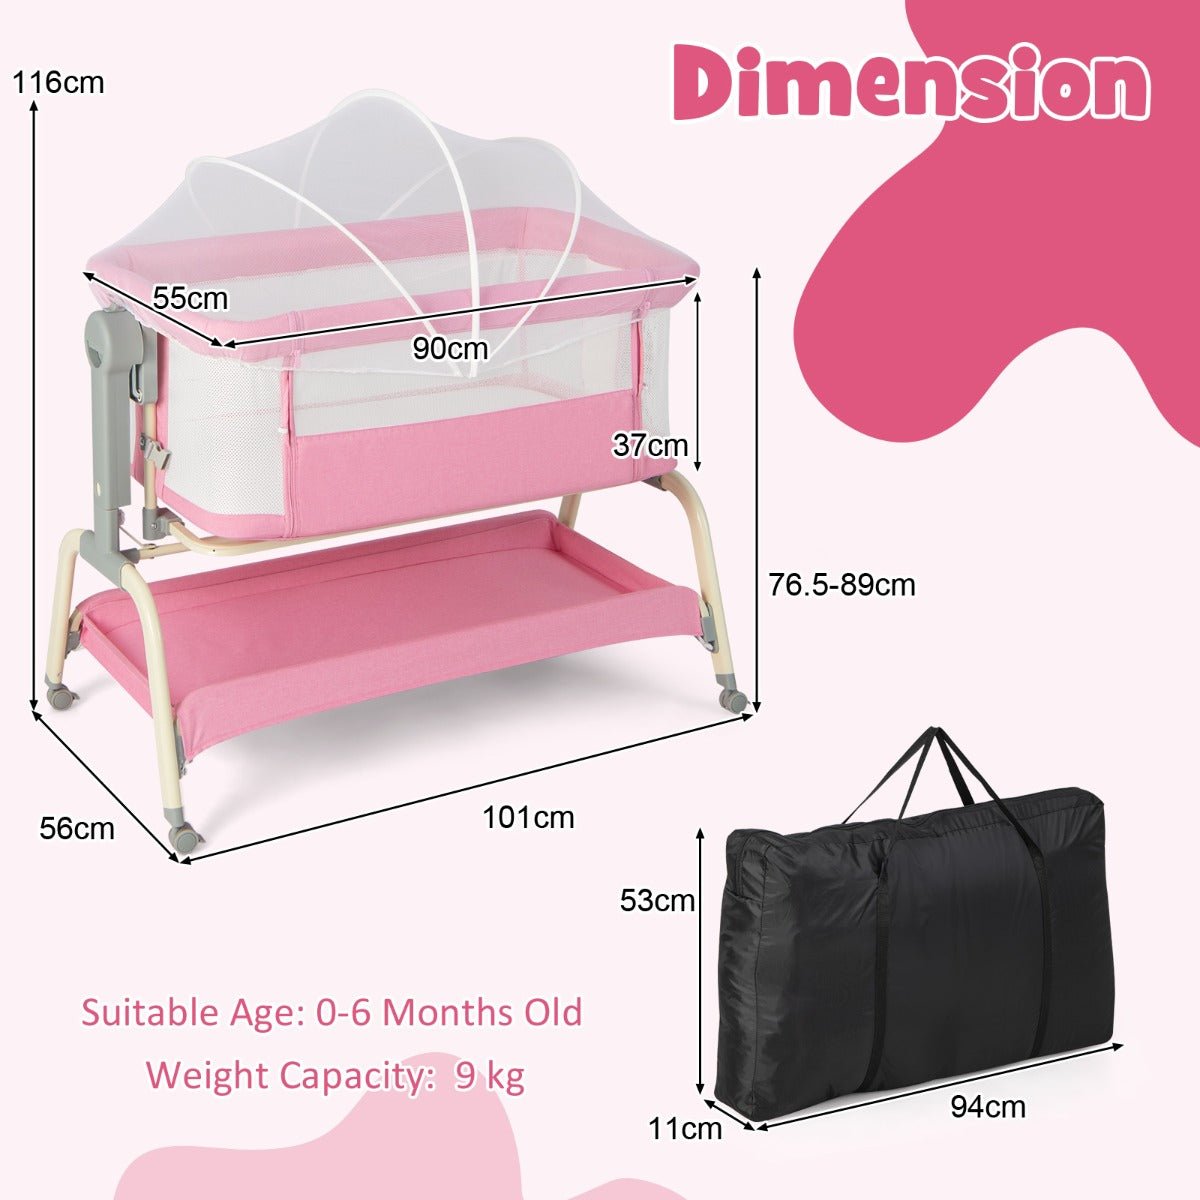 Safe and Adaptable: Pink 3-in-1 Travel Cot for Babies